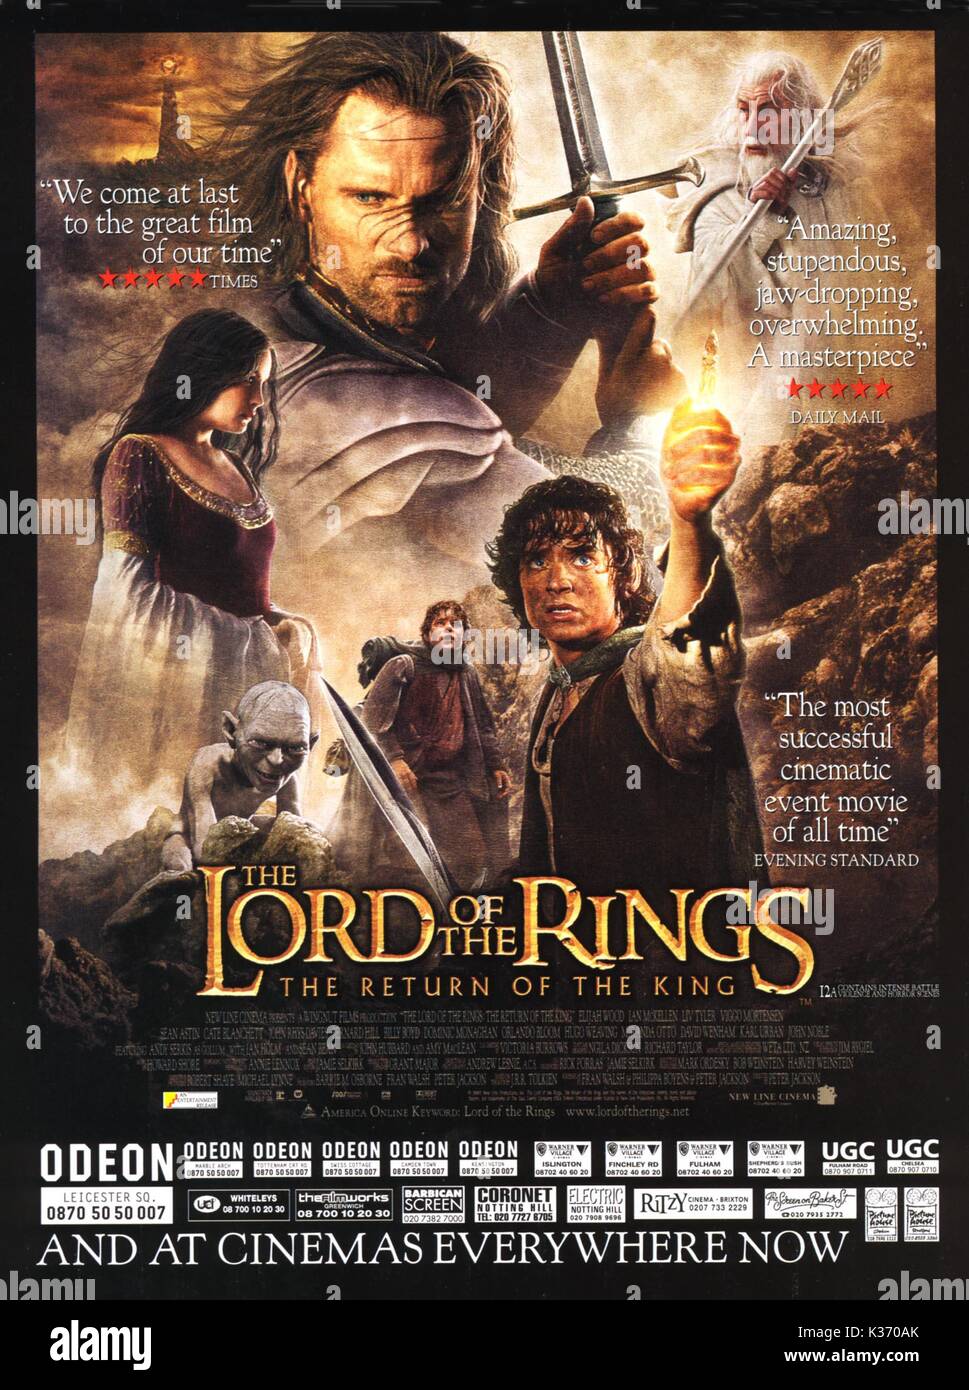 The Lord of the Rings: The Return of the King Characters Poster